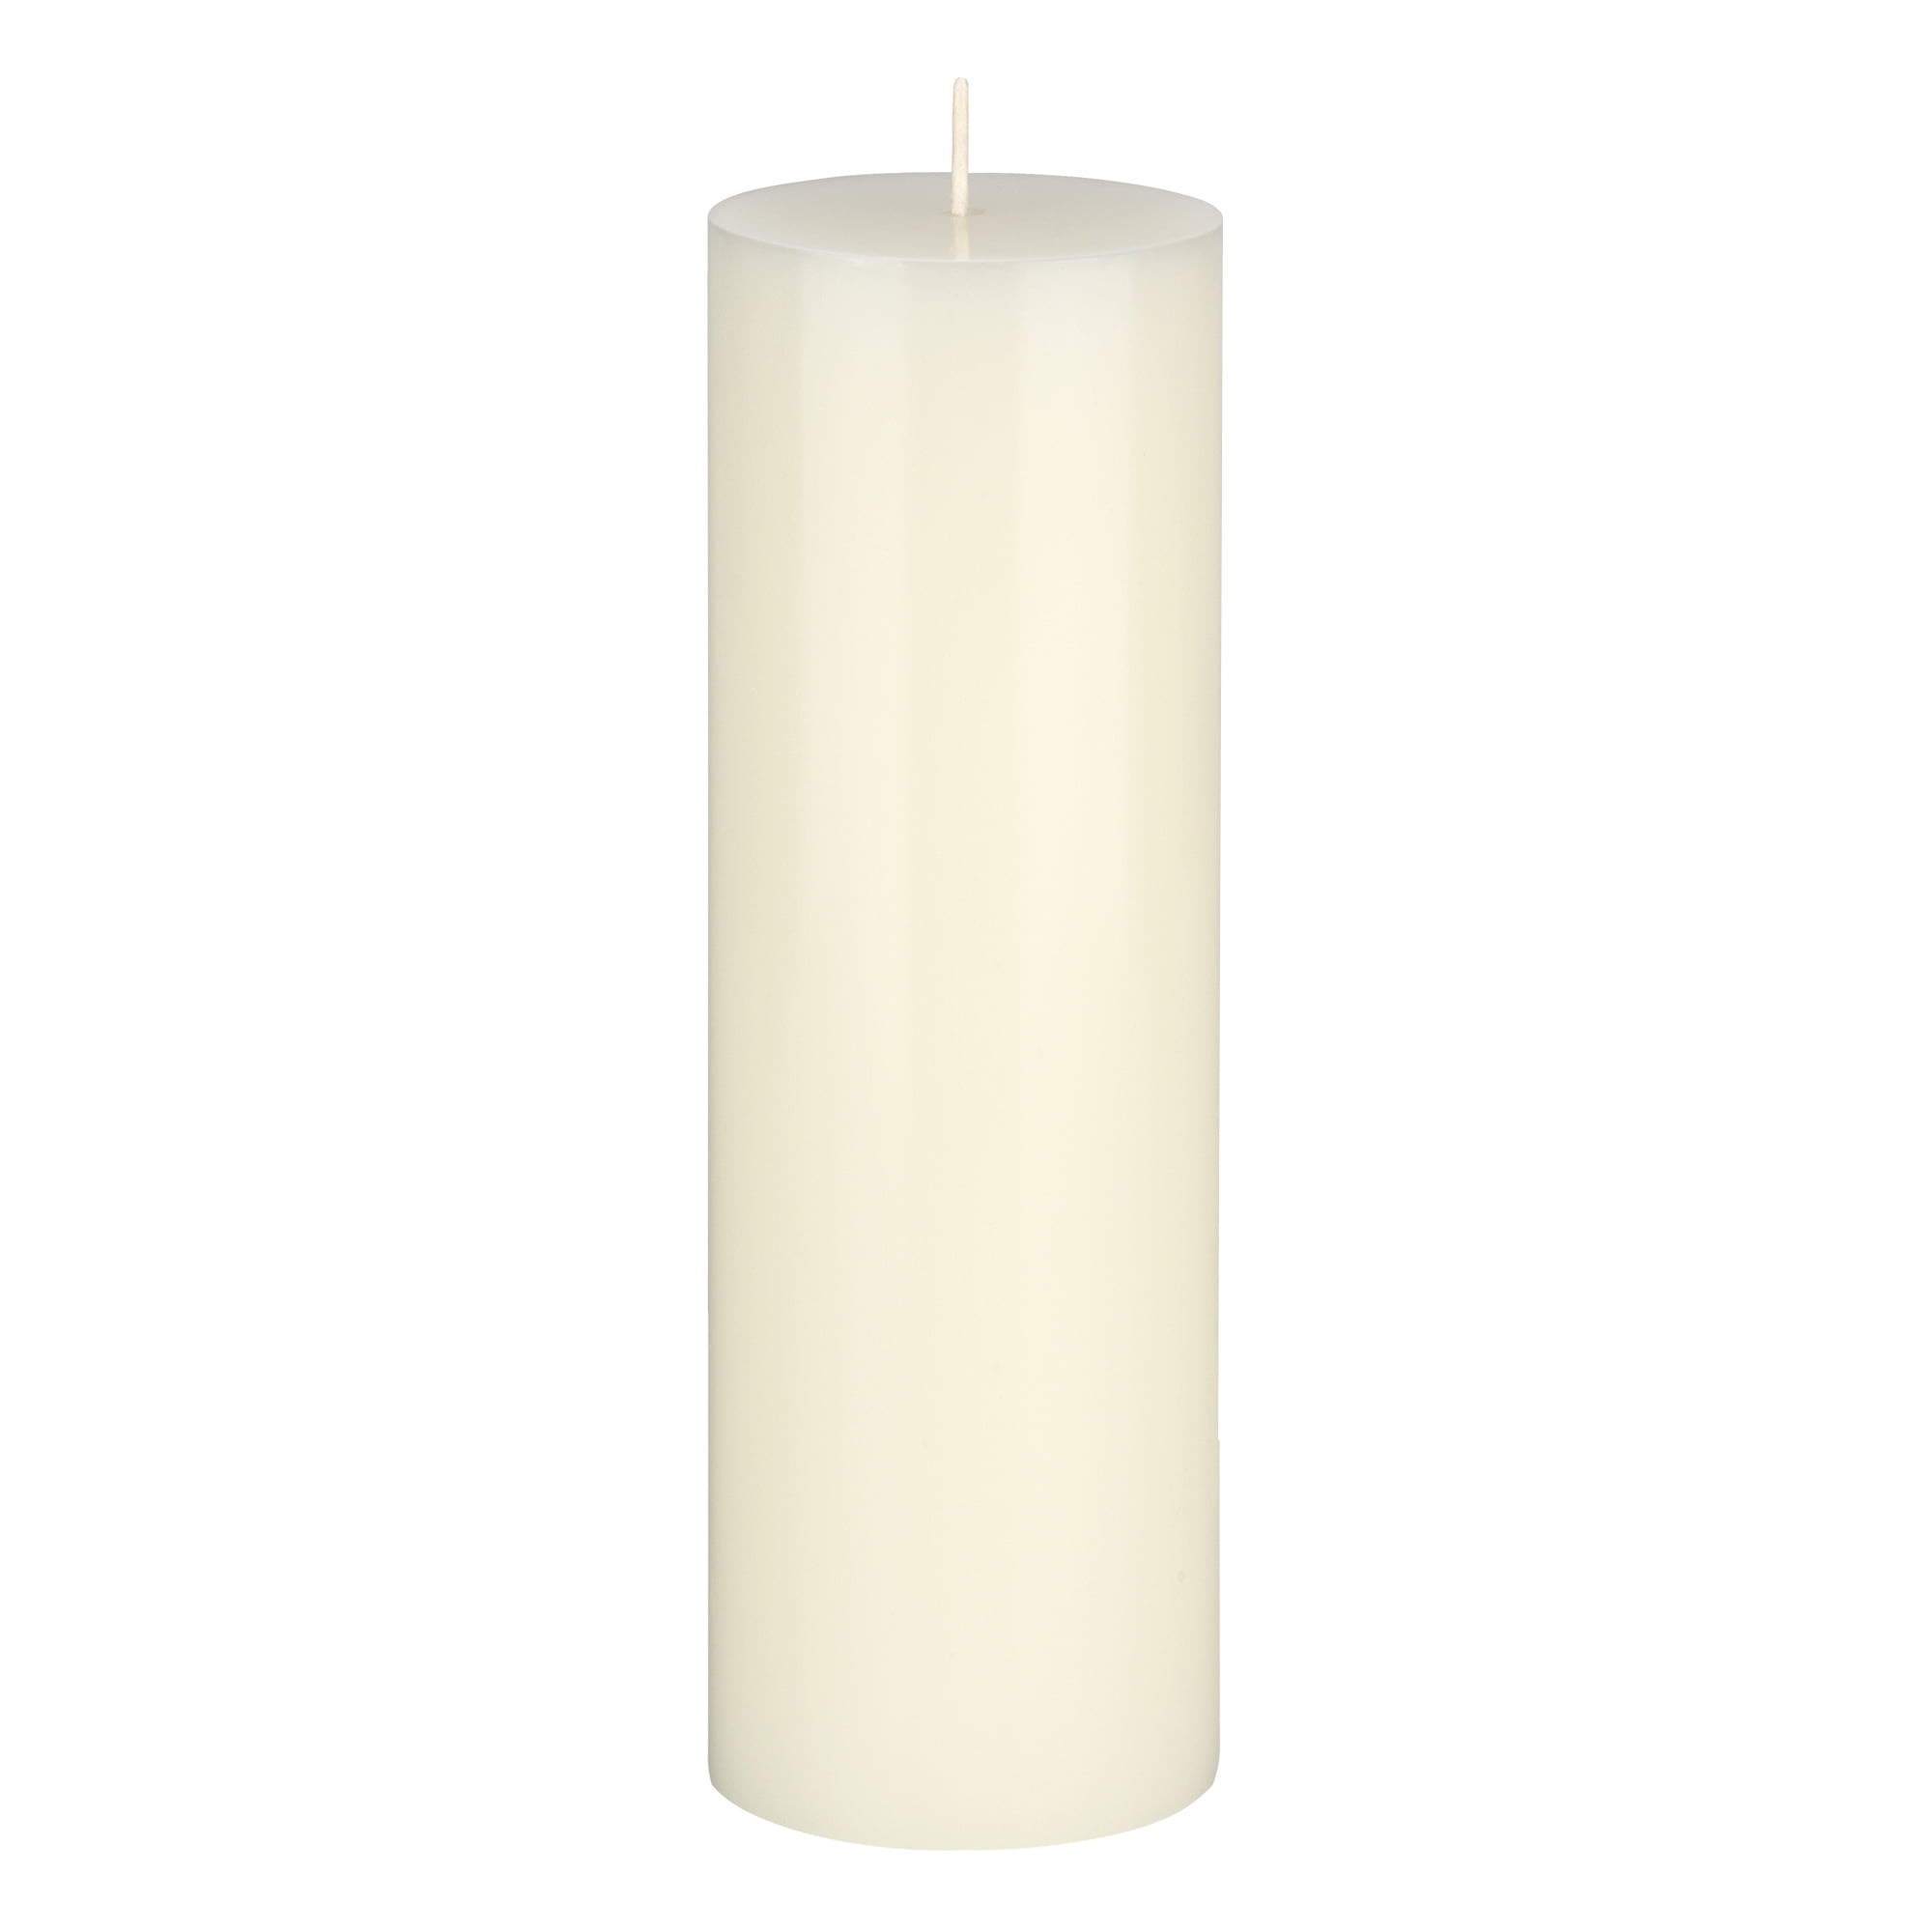 Ivory Mega Candles Set of 6 Unscented 3" x 3" Round Pillar Candle 